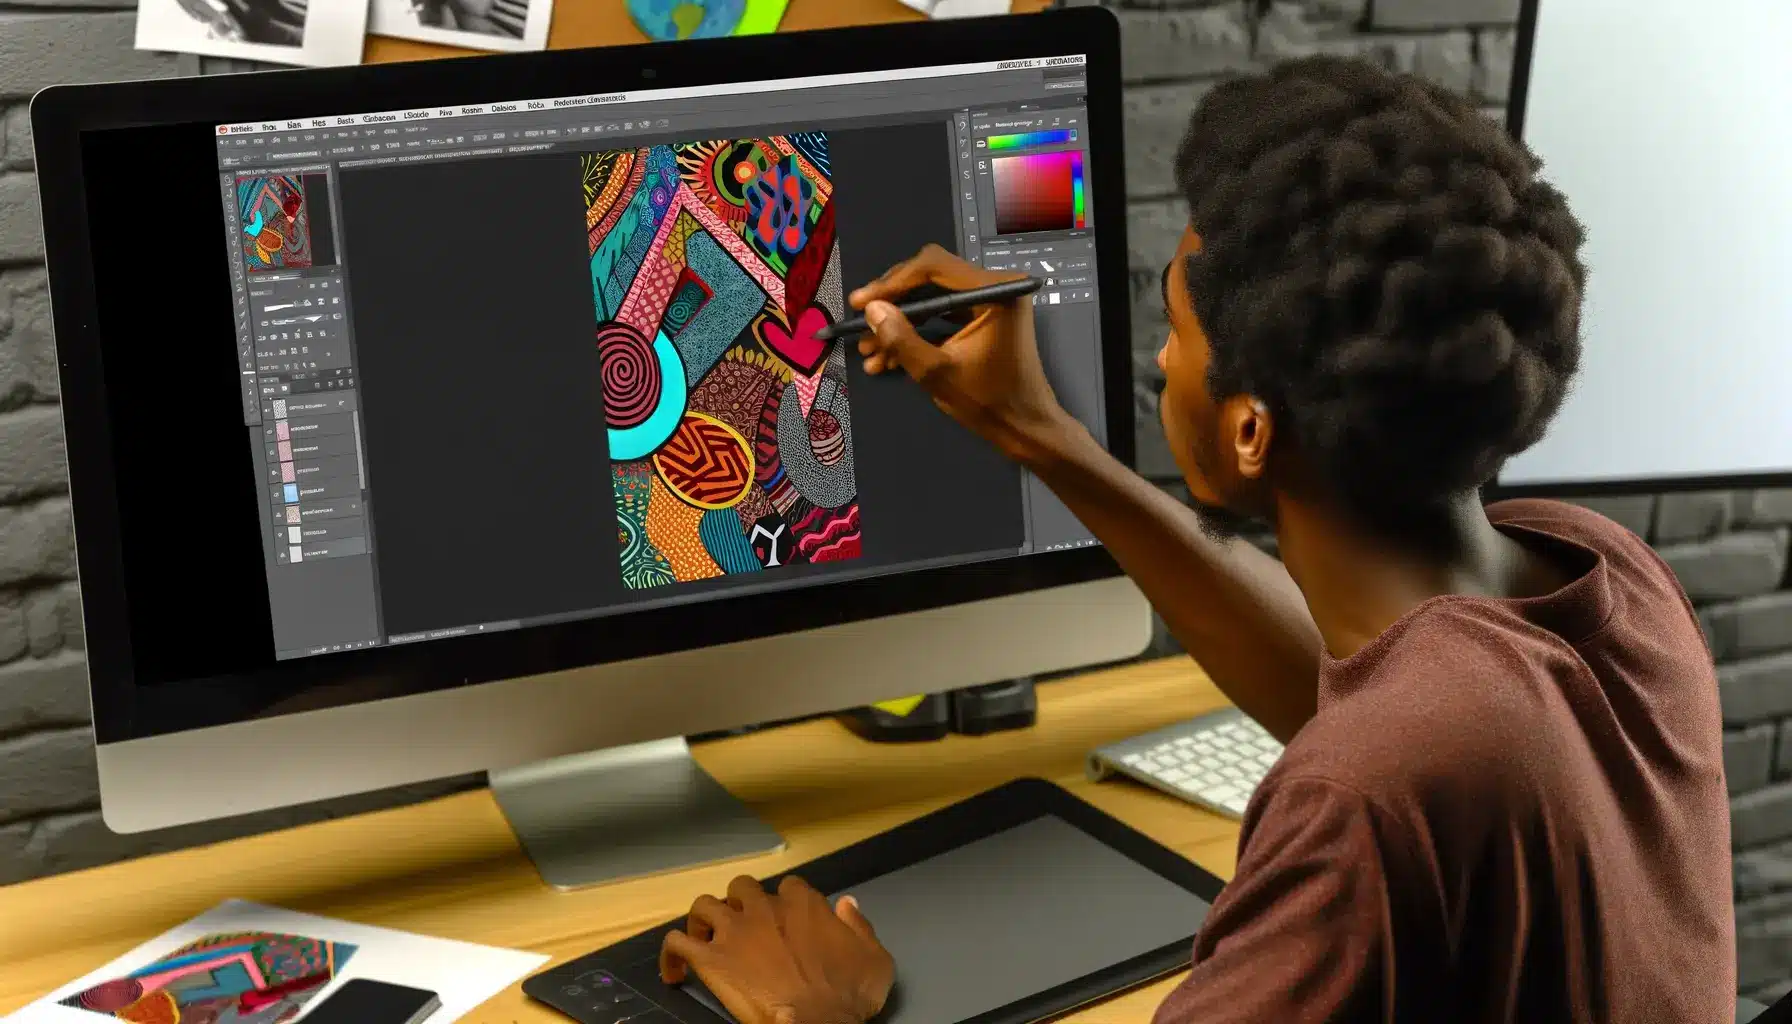 A young Black man uses the shape tool in Photoshop to create custom shapes for an intricate design on his computer.